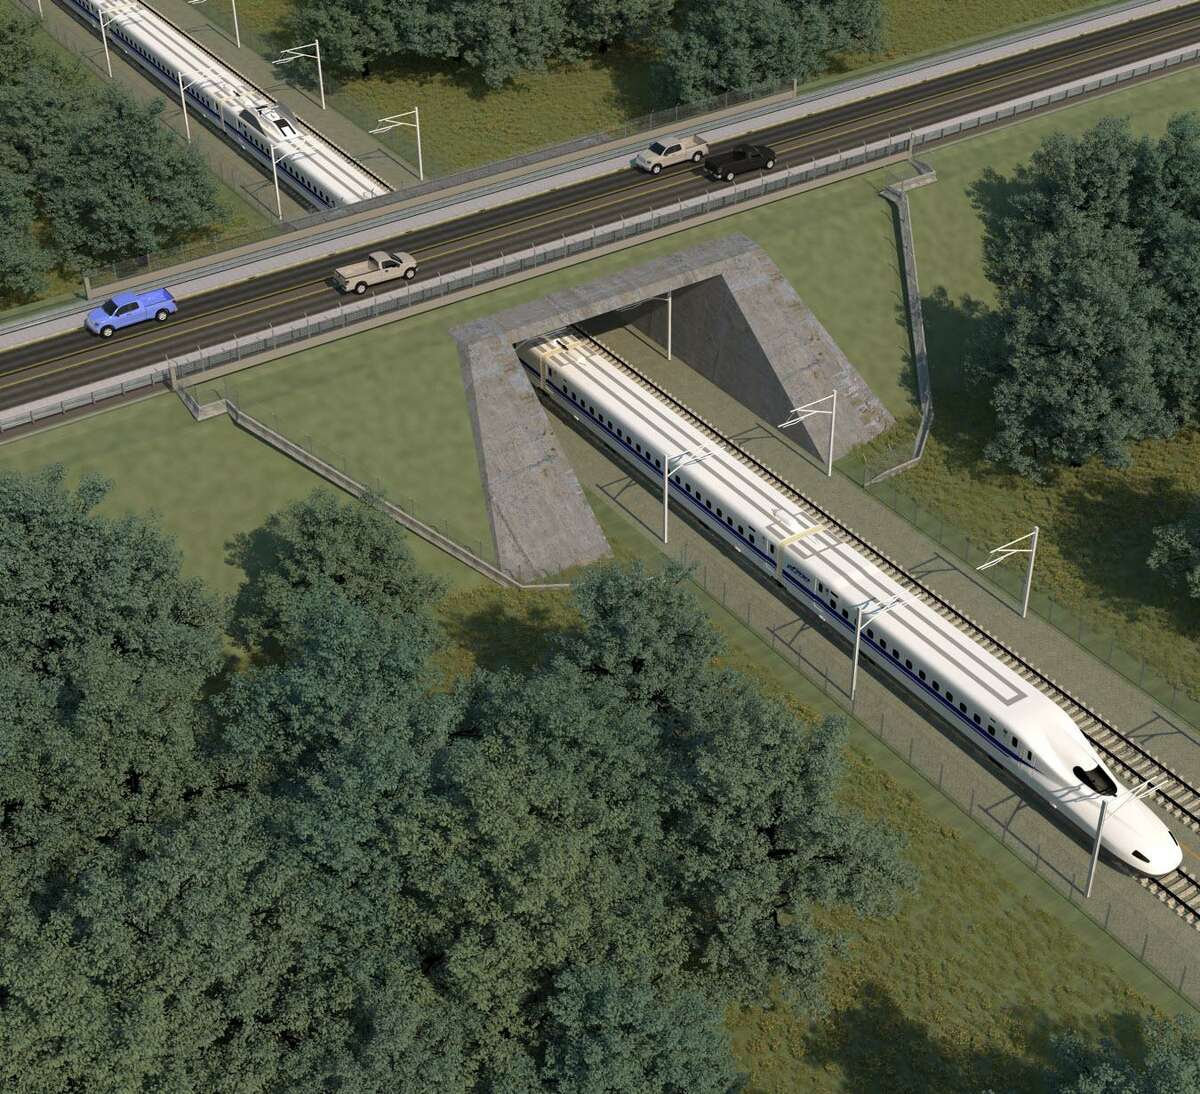 Viaducts and overpasses, as seen in this artist rendering, are intended to separate a planned high-speed rail line between from Houston to Dallas from vehicle traffic along the 240-mile route.